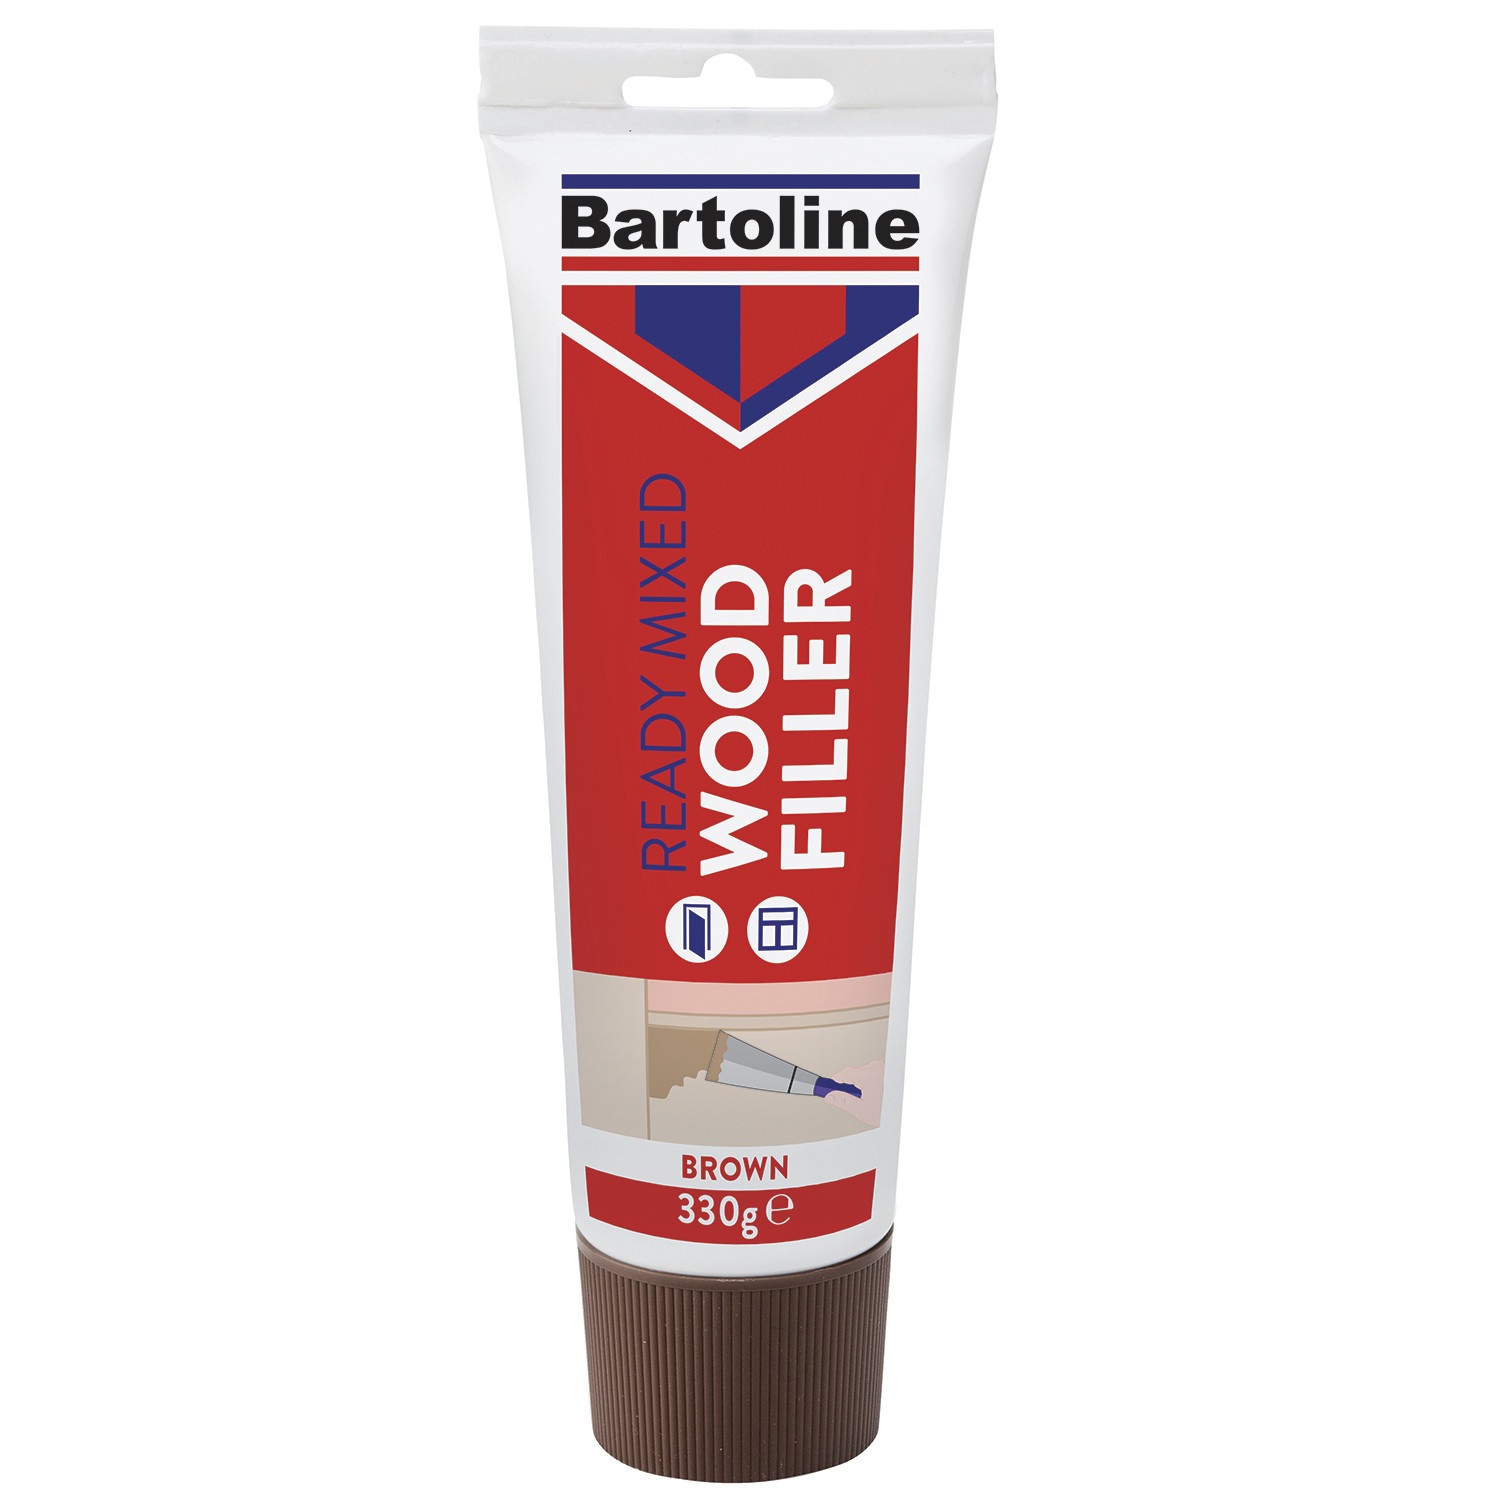 Bartoline Brown Ready Mixed Wood Filler 330g Image